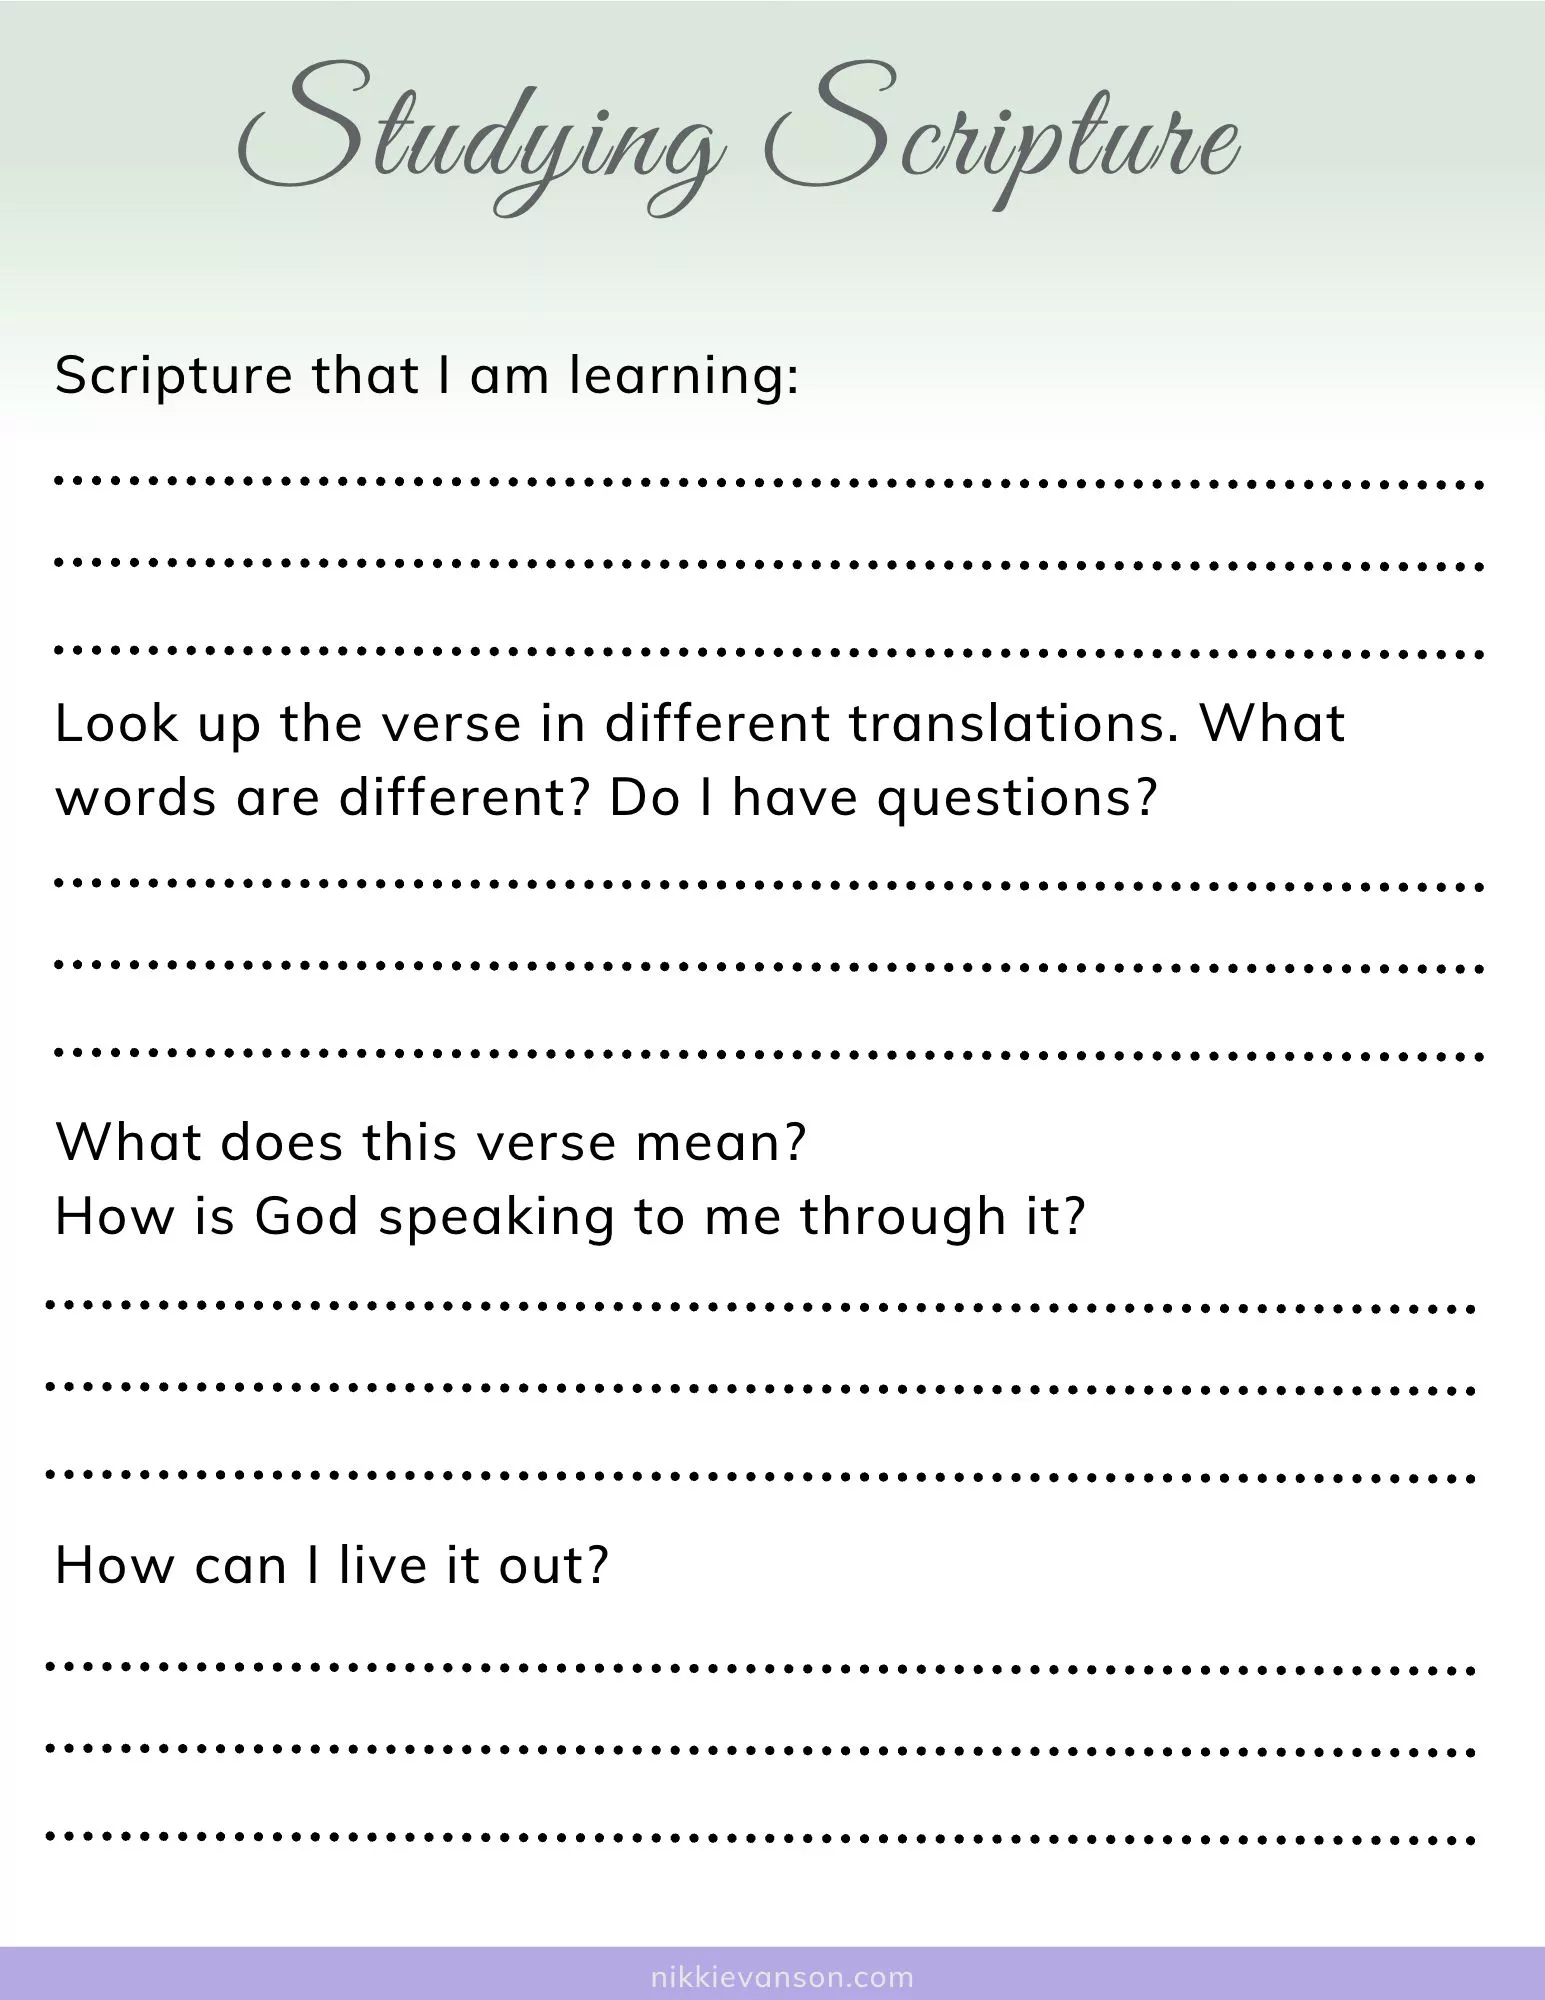 Studying scripture resource